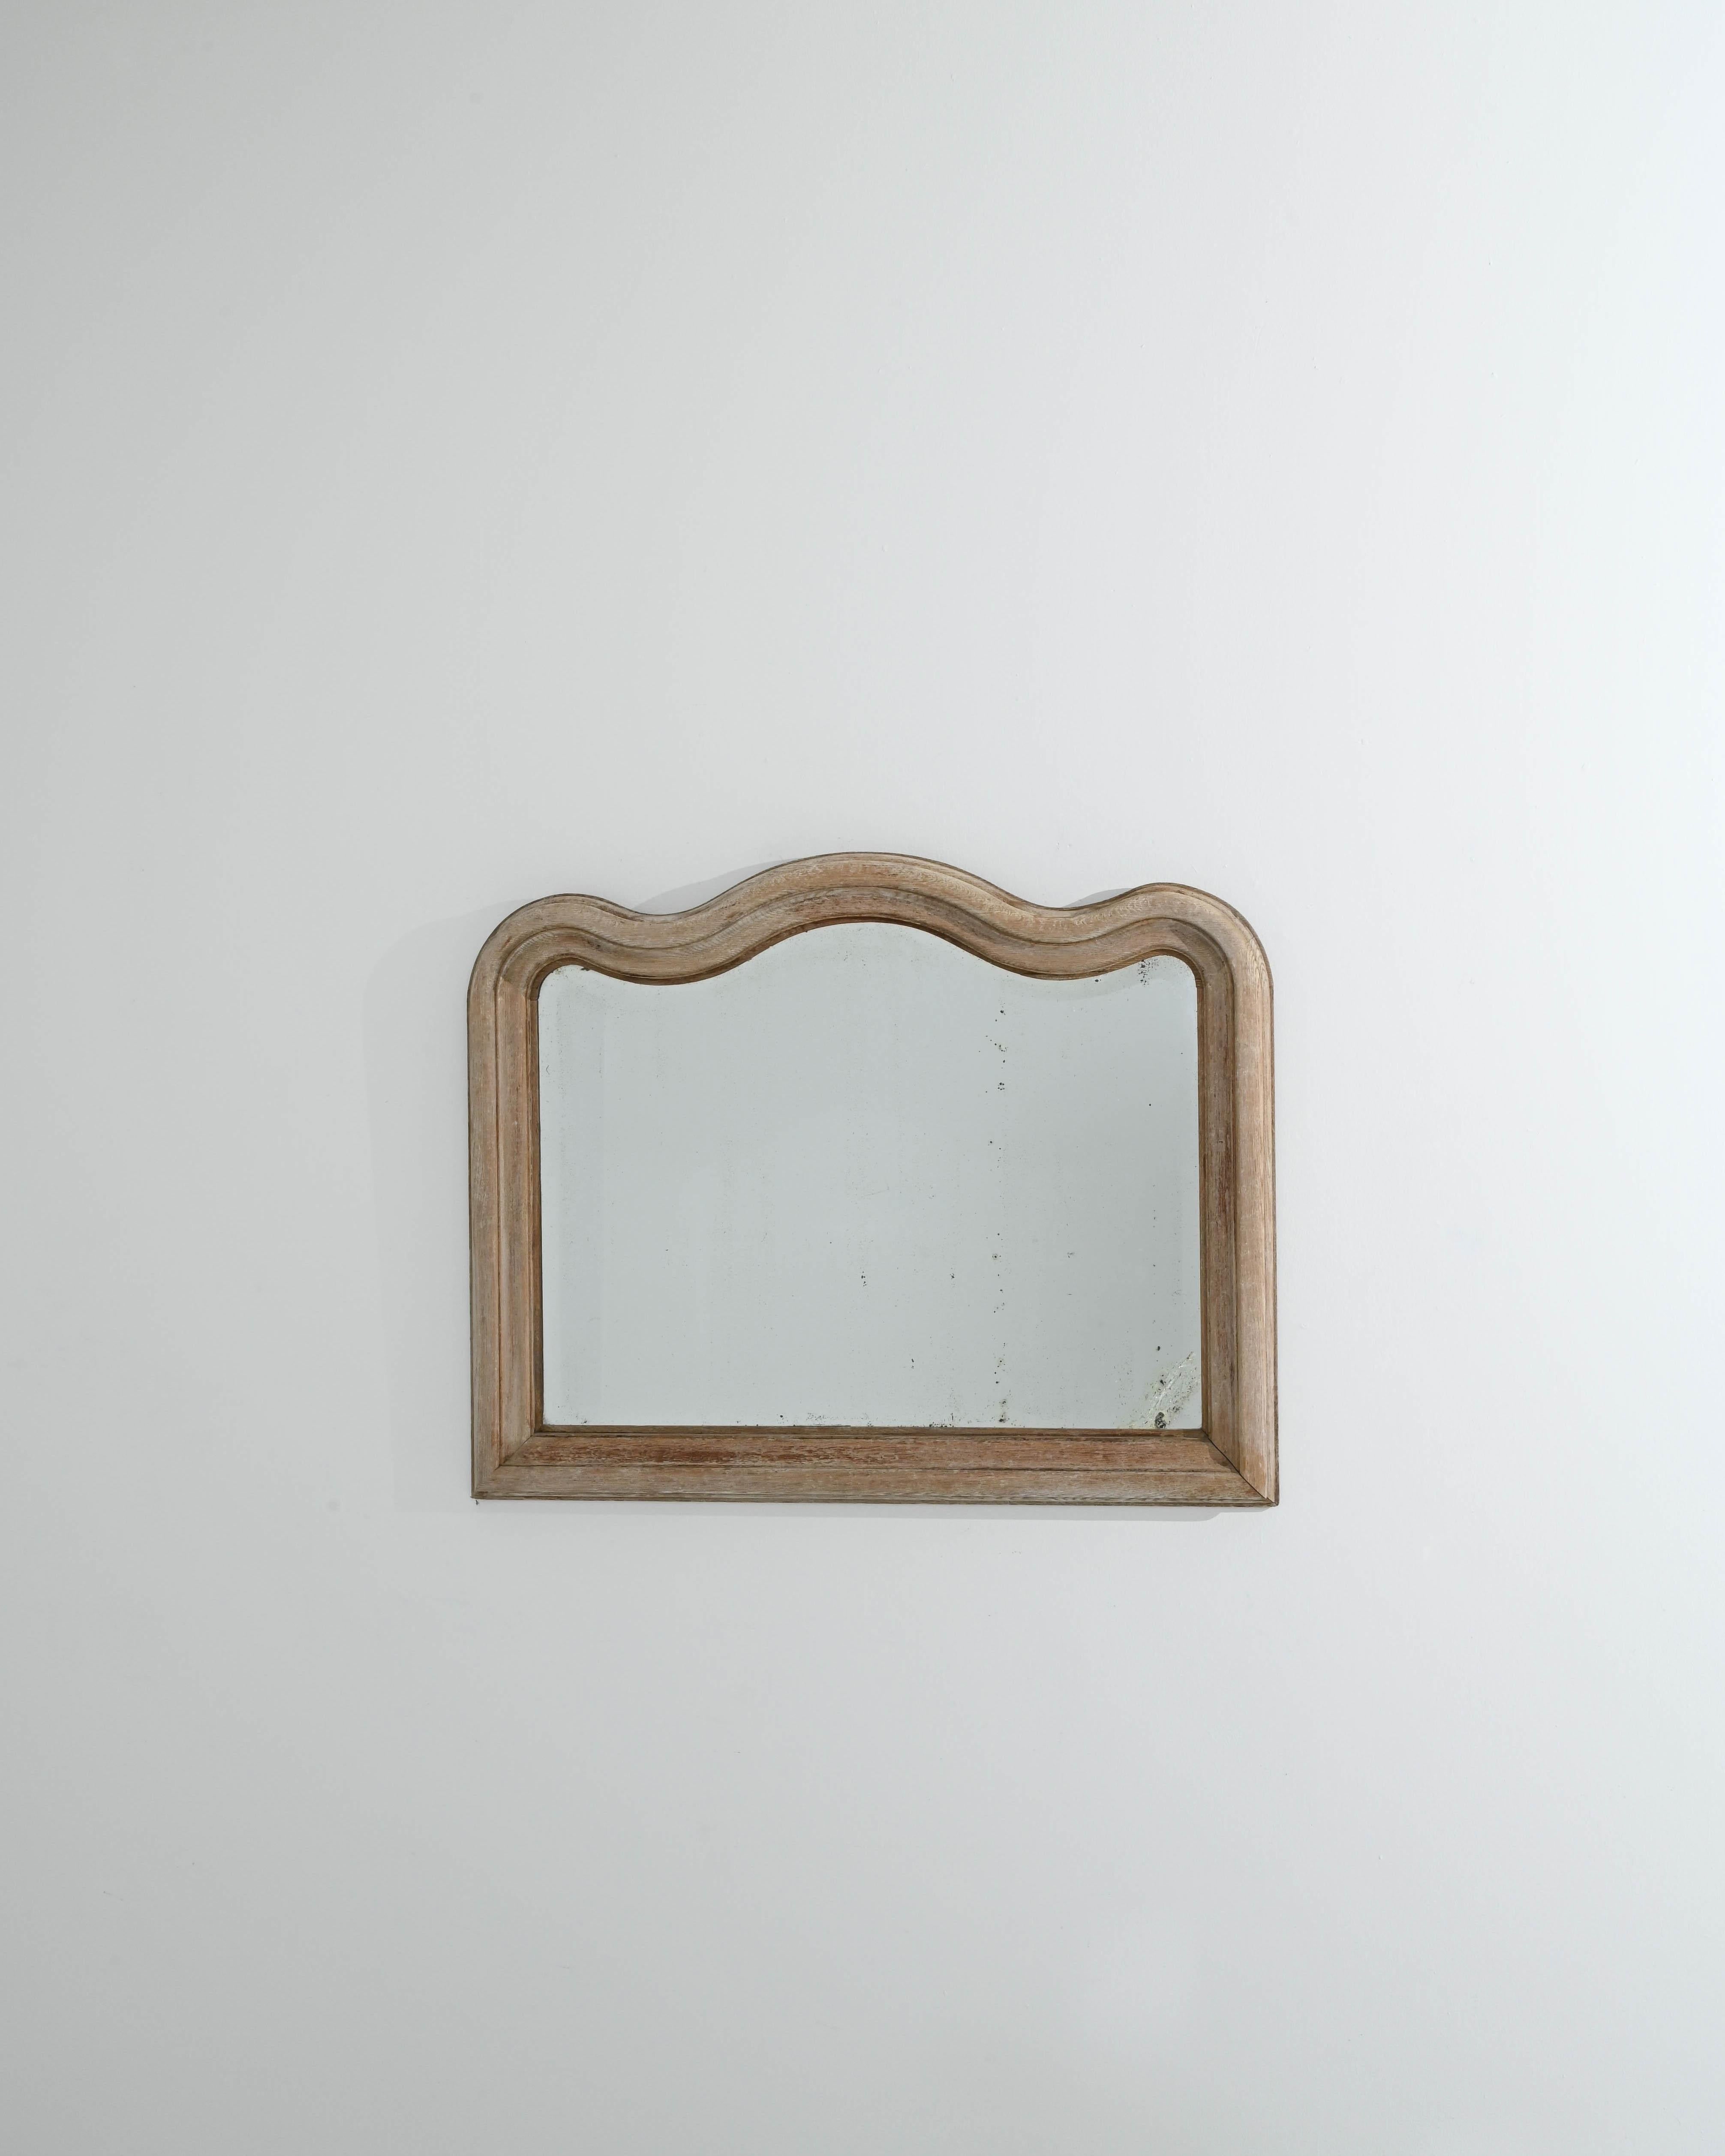 Made circa 1900 in Belgium, this antique mirror showcases a masterfully crafted oak frame. The looking glass is adorned with smooth, wavy outlines that grace its crown, creating a captivating contrast with the sharp angularity of the lower frame.